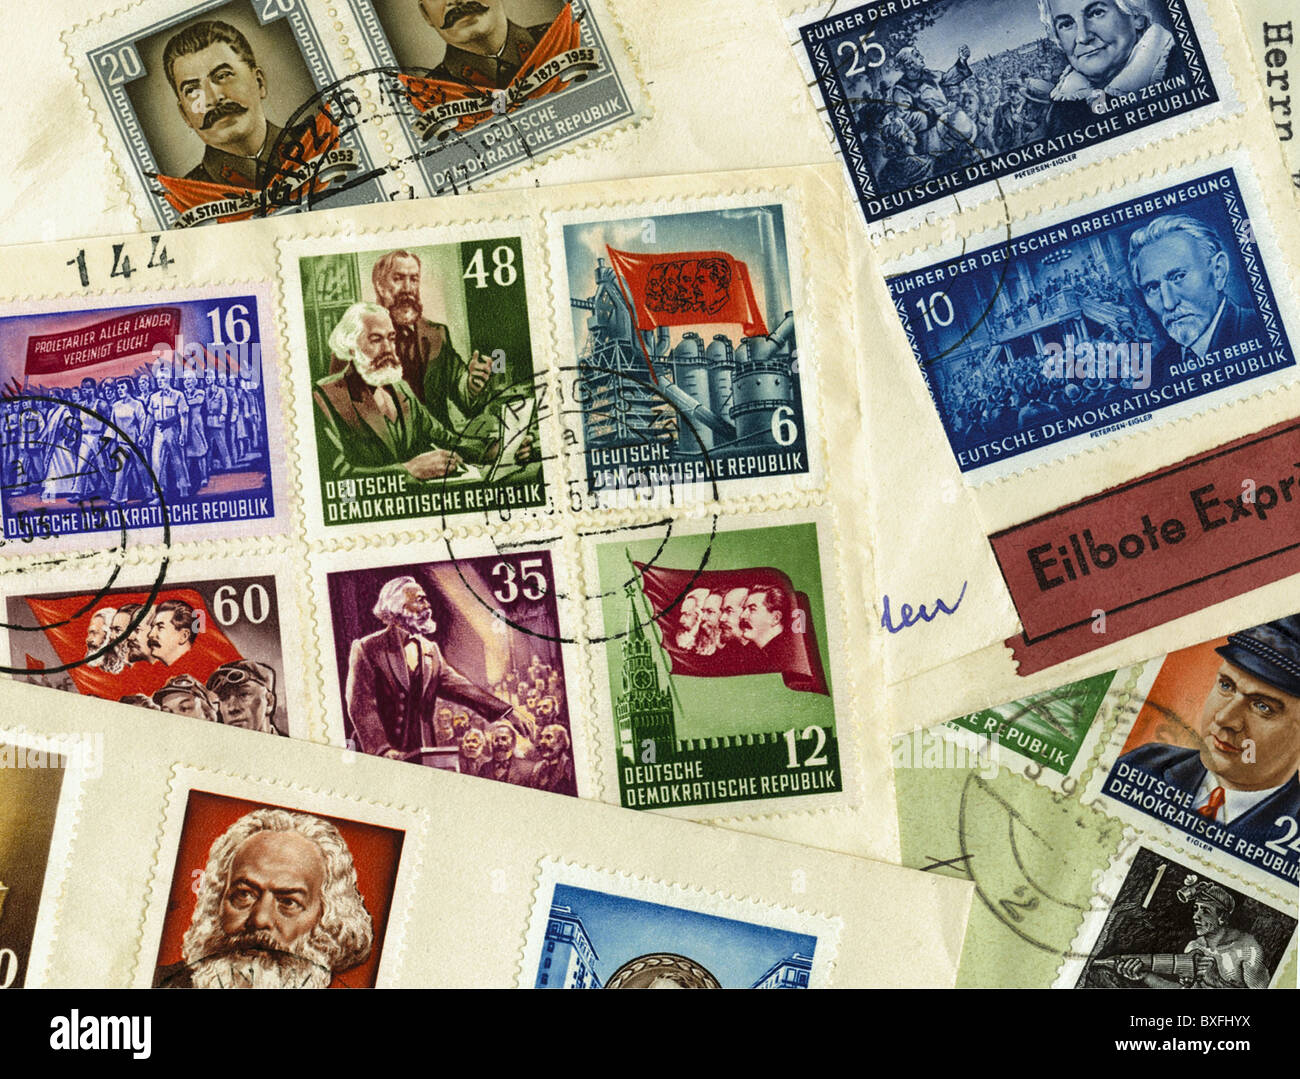 mail / post, postage stamps, GDR stamps, circa 1953, Additional-Rights-Clearences-Not Available Stock Photo